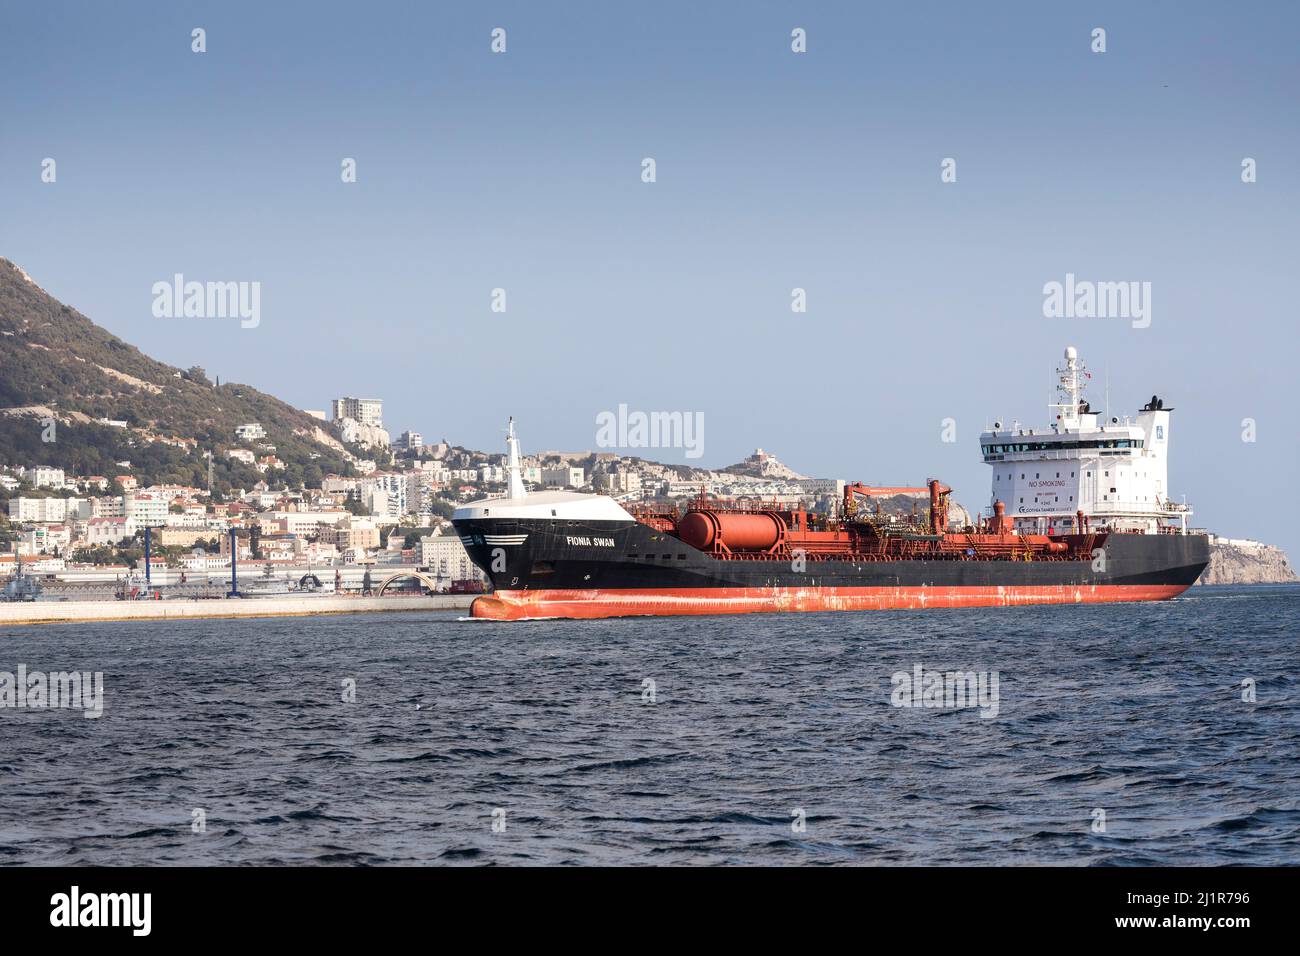 Shipping, the Fionia Swan chemical and oil tanker in the Bay of Gibraltar Stock Photo